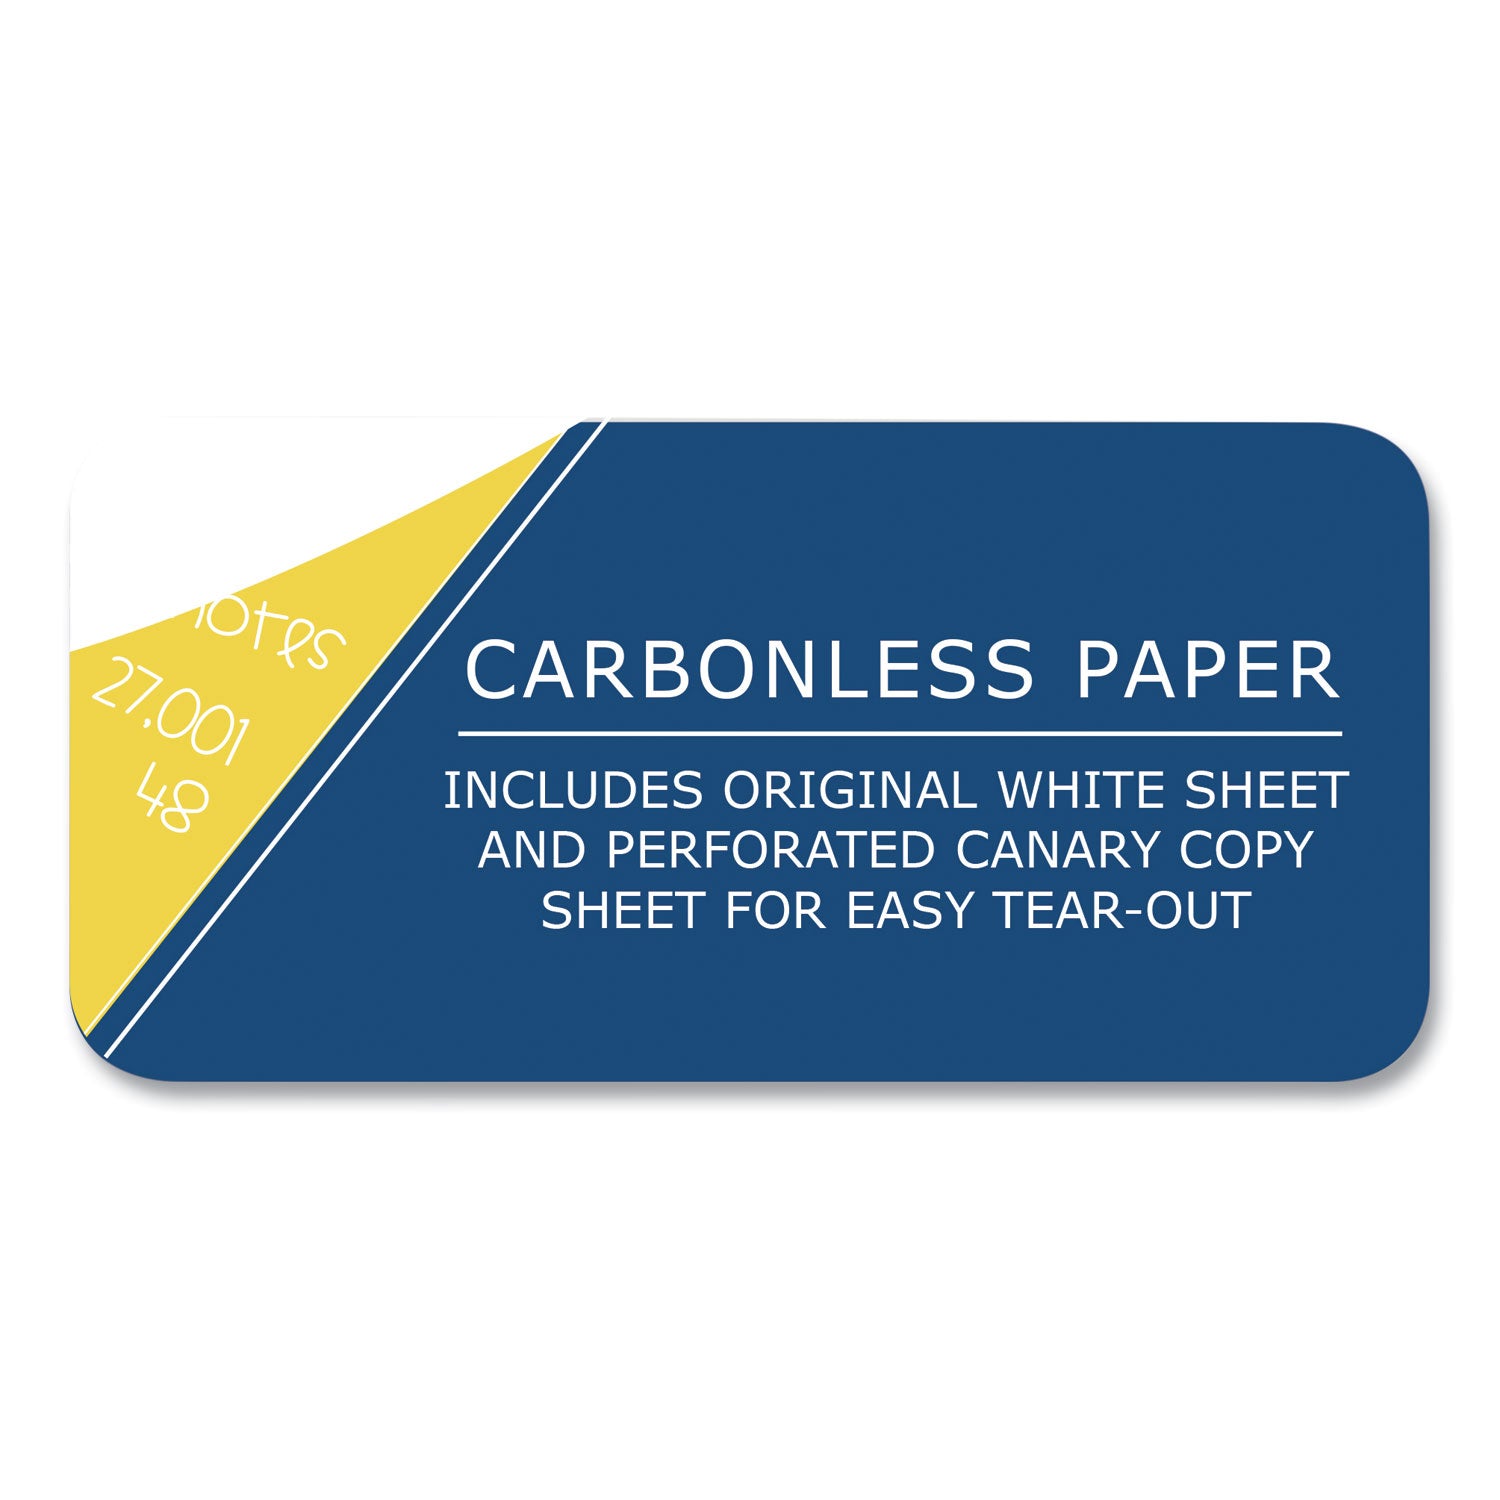 lab-and-science-carbonless-notebook-quad-rule-4-sq-in-gray-cover-100-11-x-9-sheets-12-ct-ships-in-4-6-business-days_roa77647cs - 7